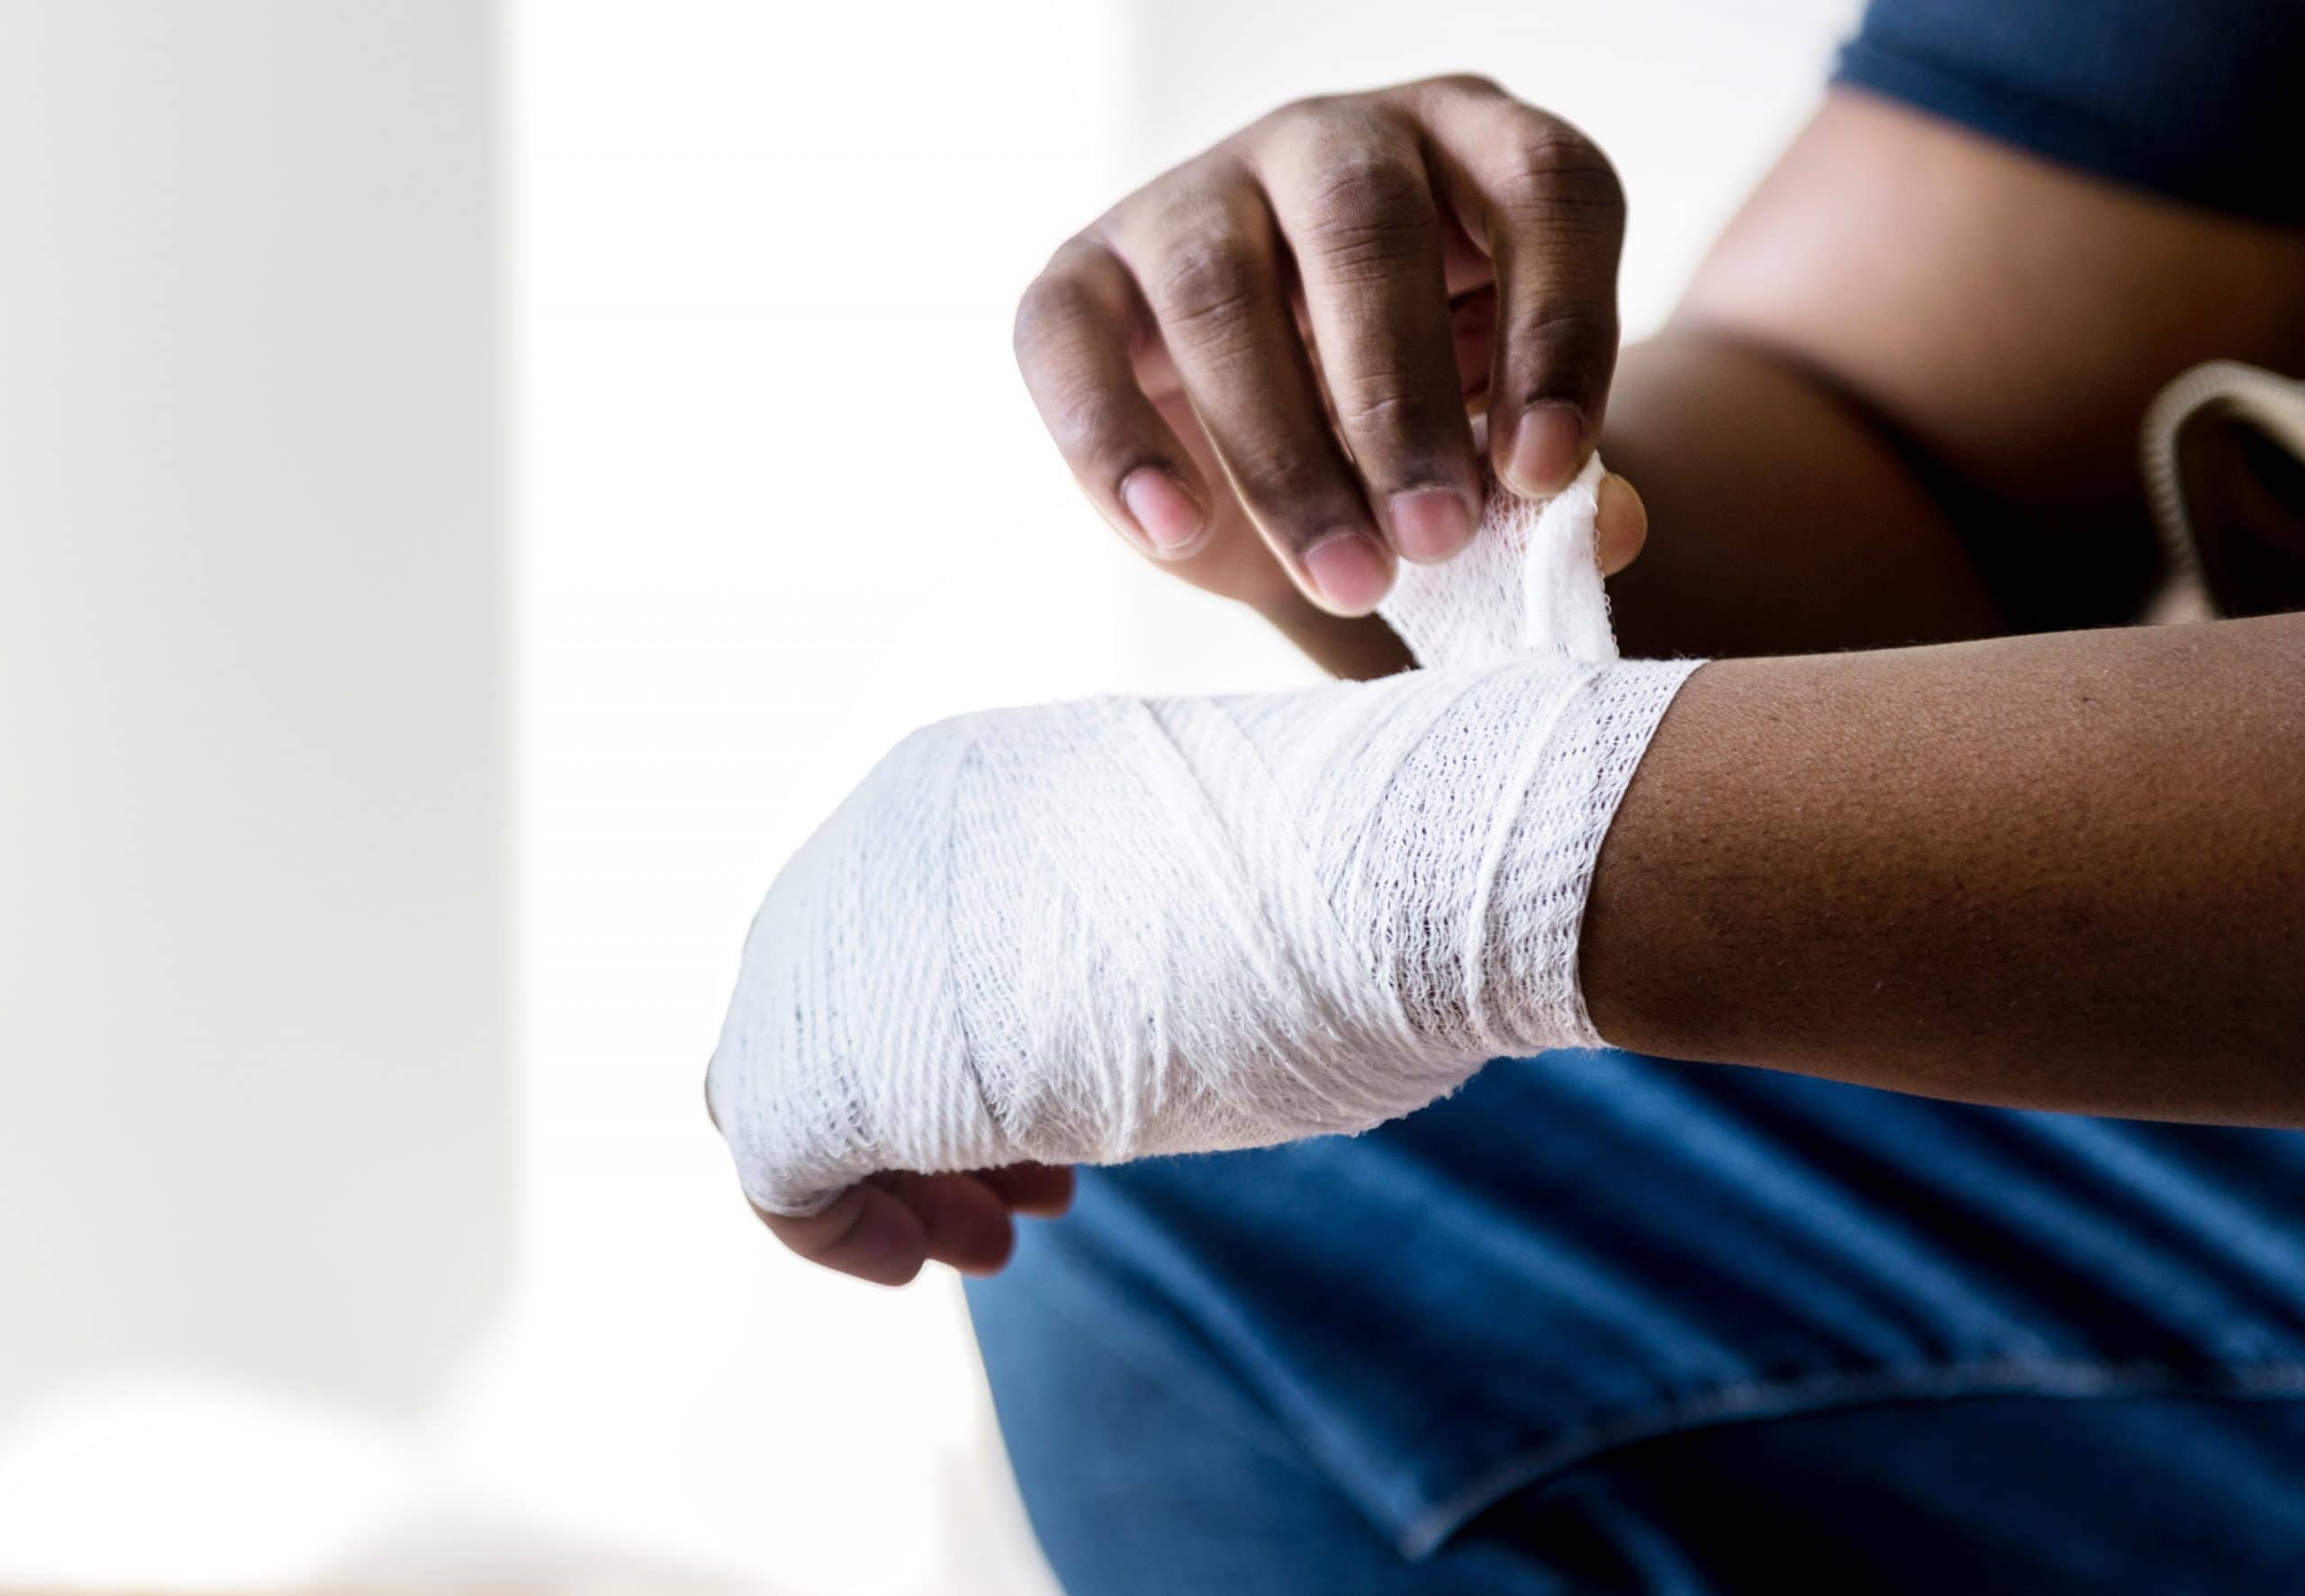 Image showing a man bandaging his hand after an on the job injury